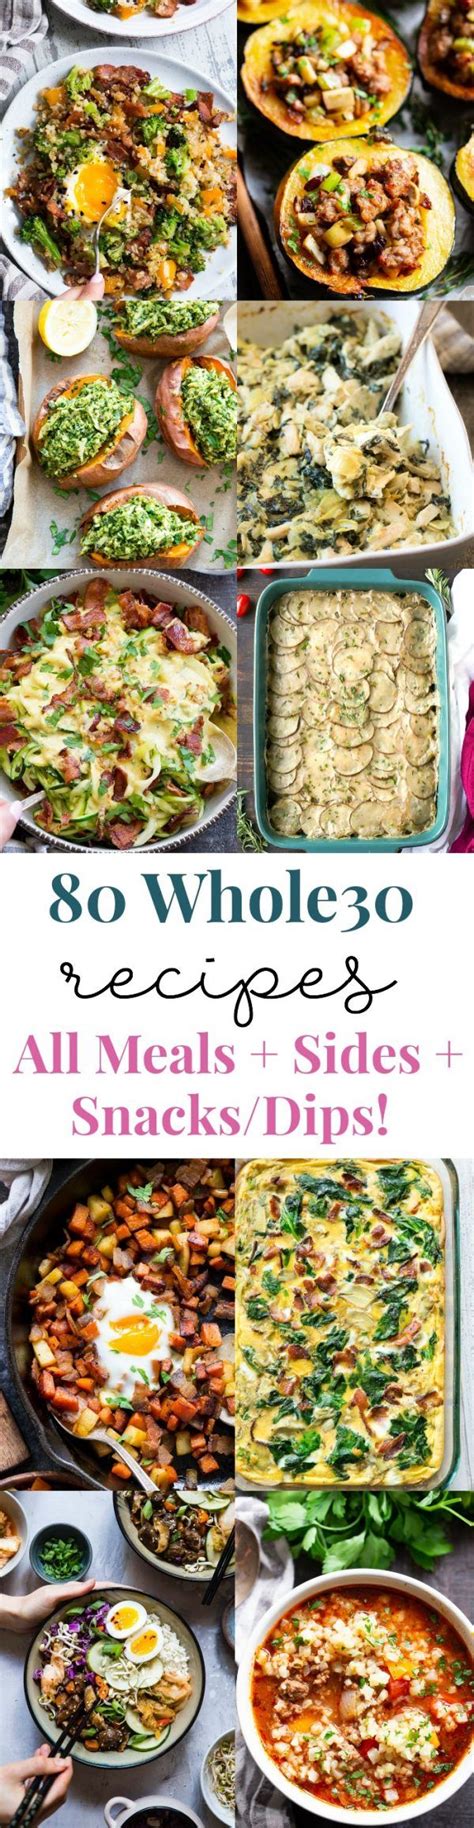 recipes  meals sides snacks dips